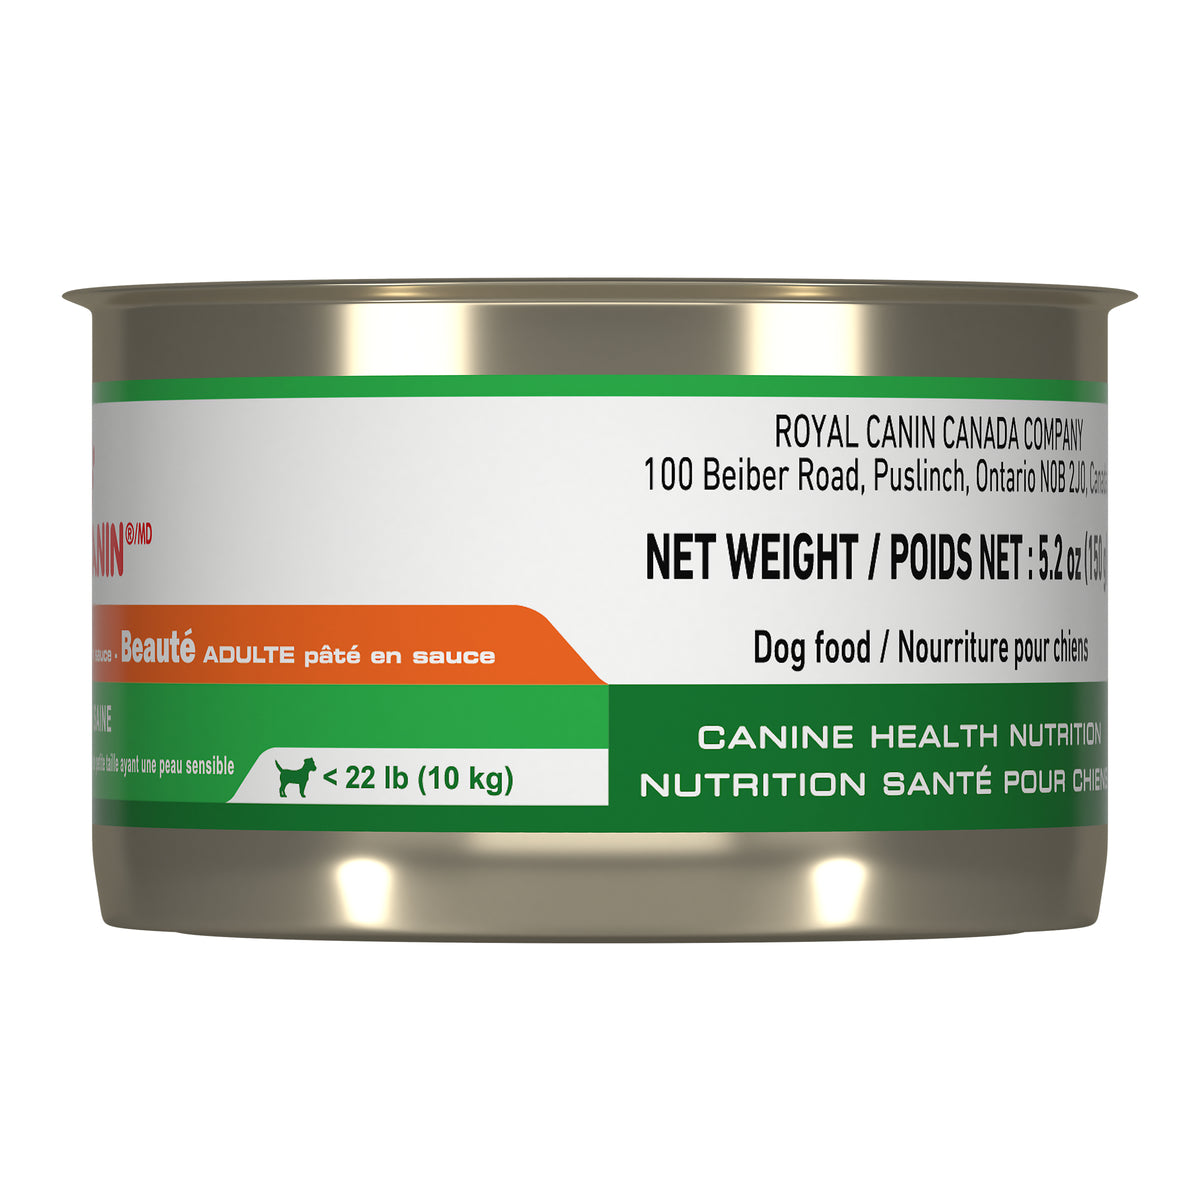 Royal Canin Beauty Adult - Wet Canned Dog Food (150g)